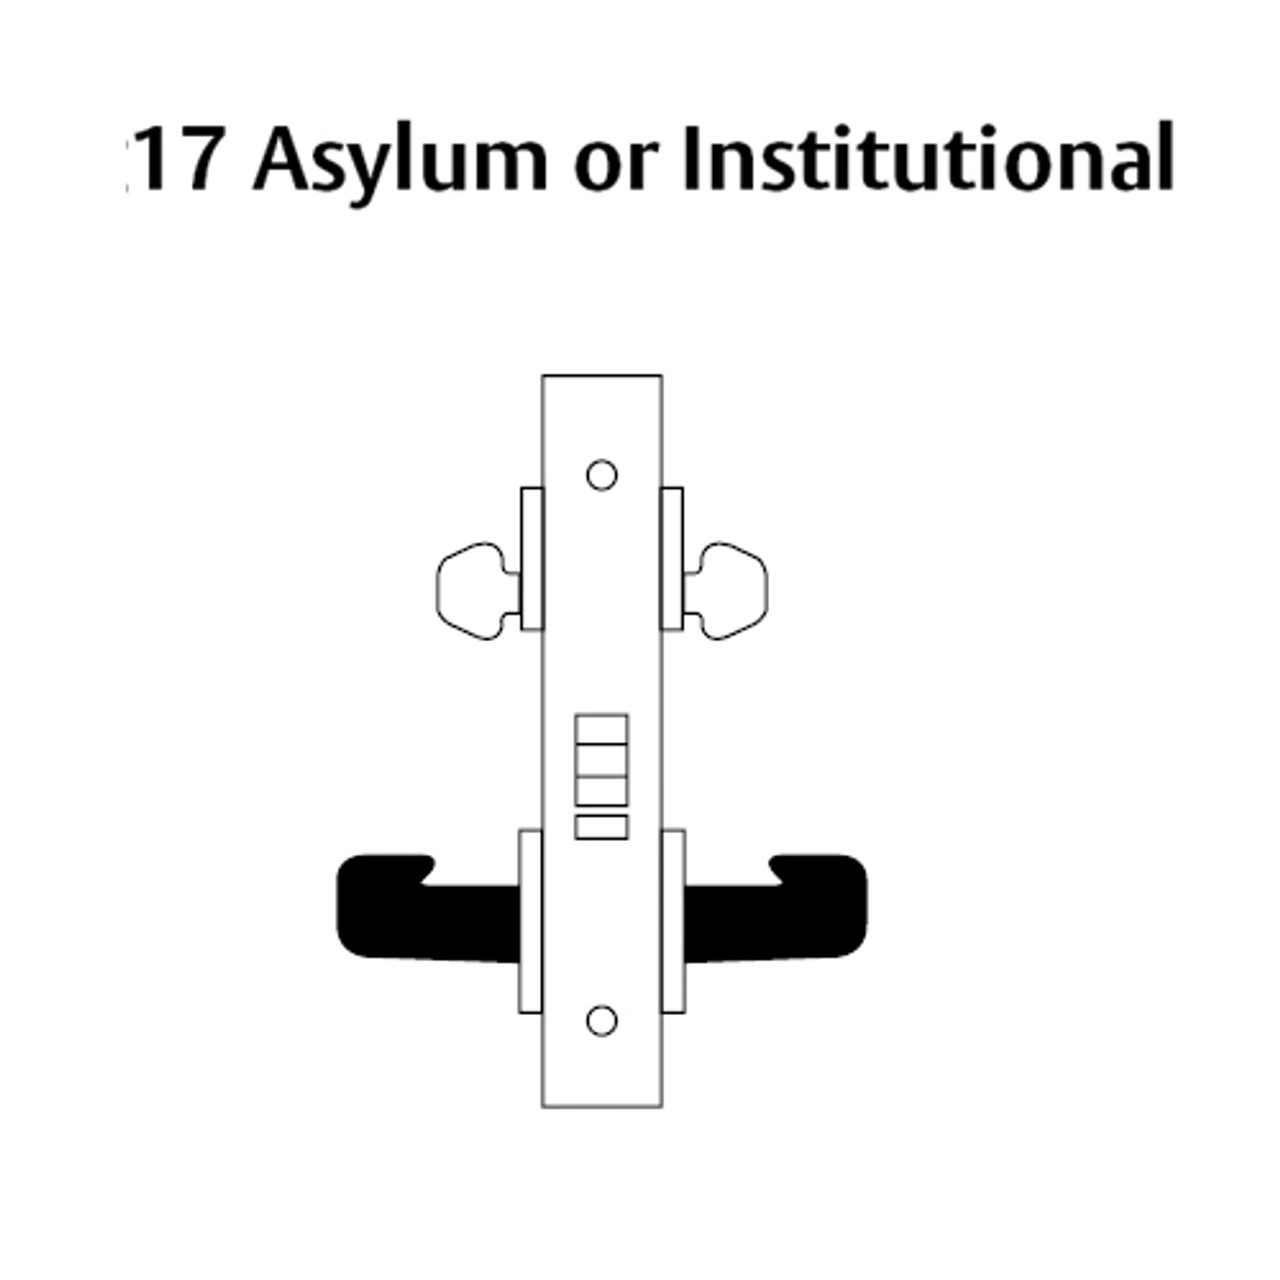 8217-LNL-26 Sargent 8200 Series Asylum or Institutional Mortise Lock with LNL Lever Trim in Bright Chrome